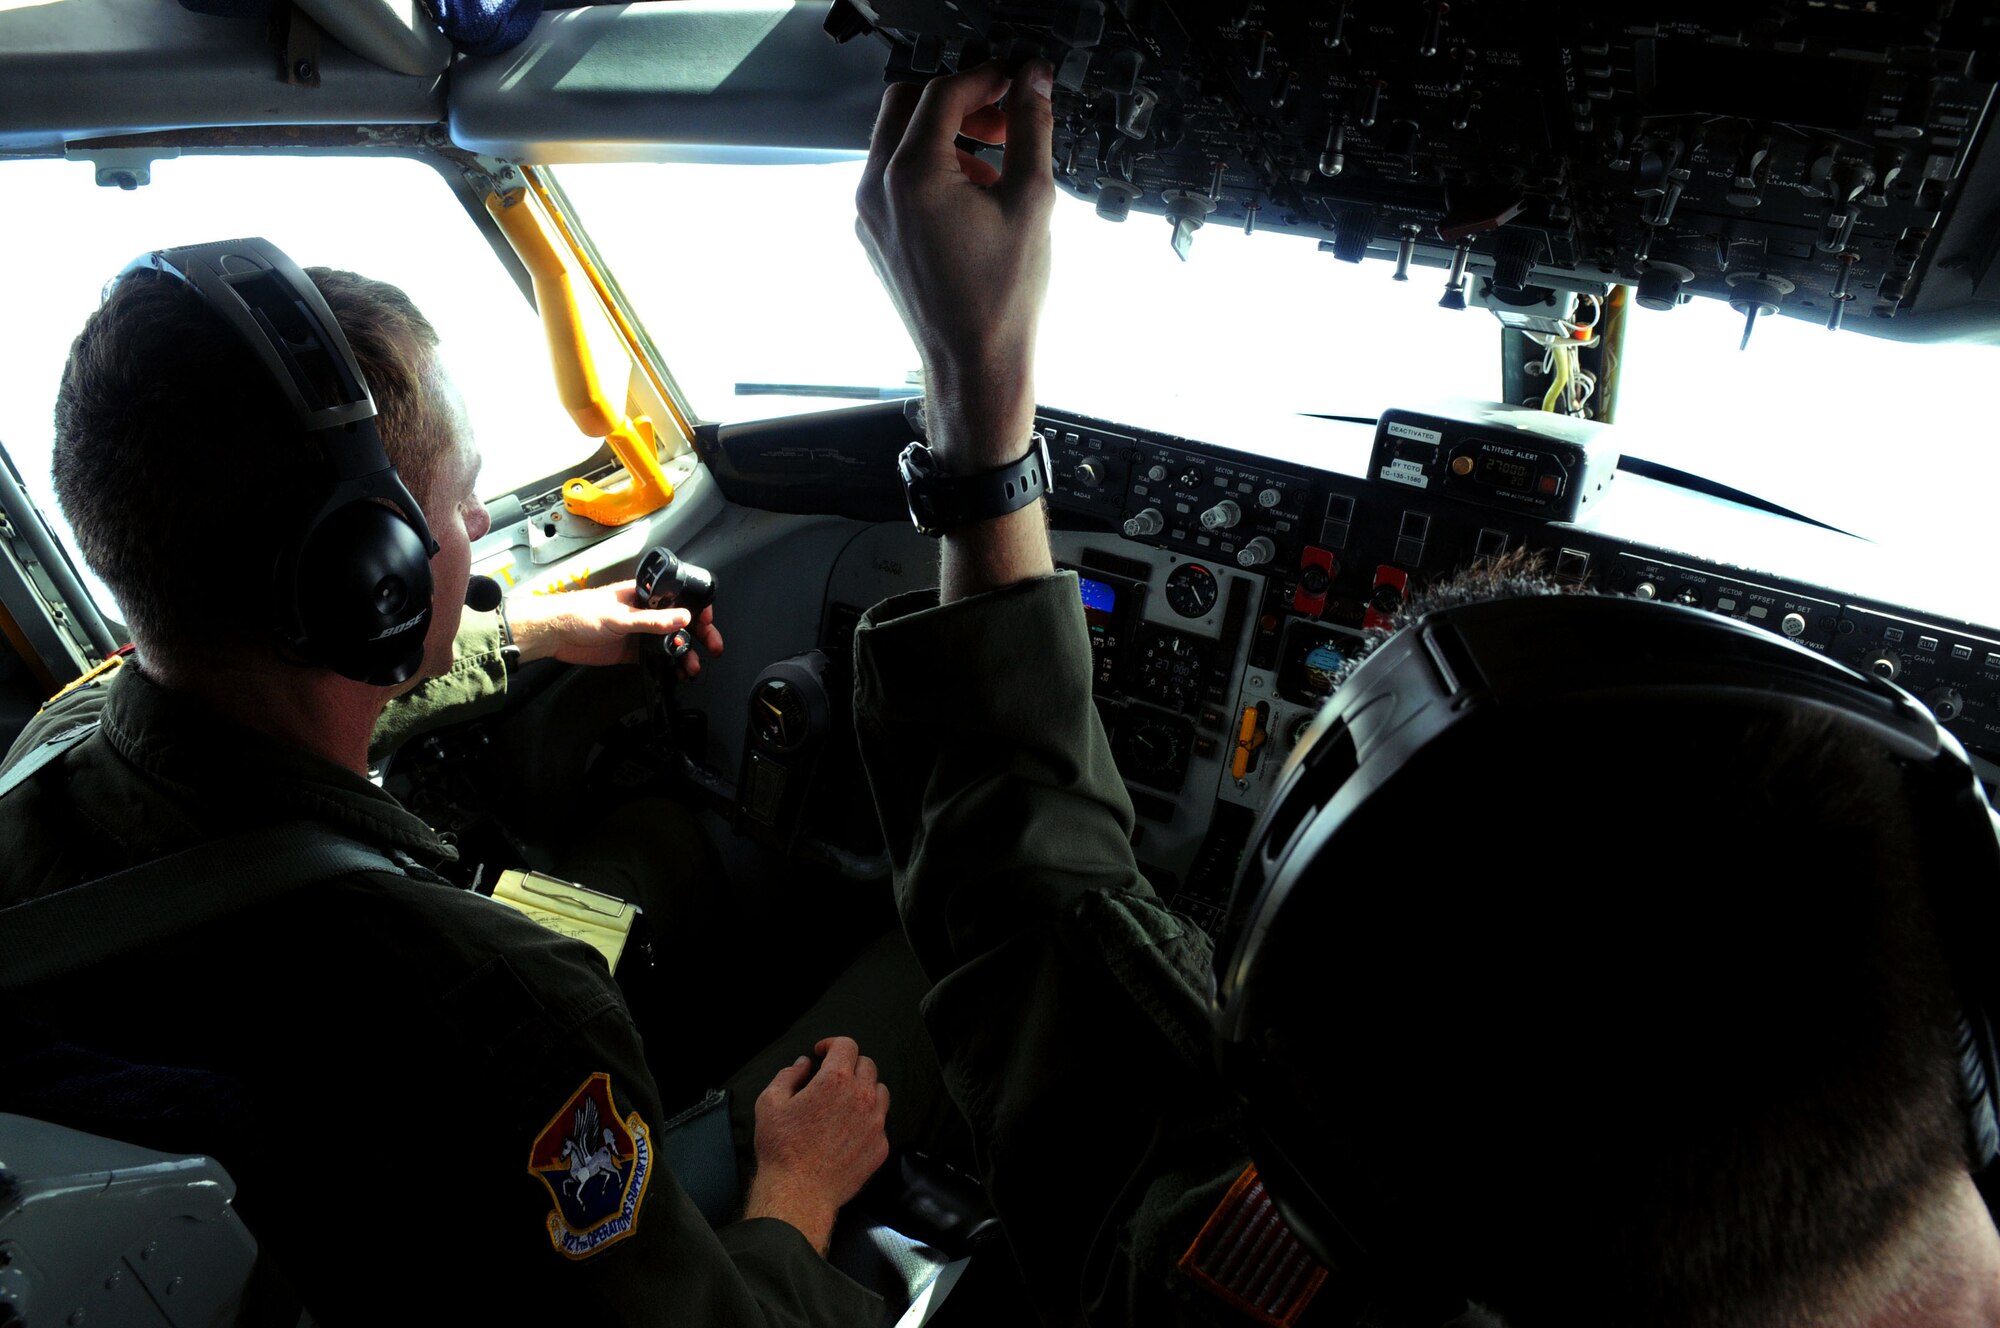 ANDERSEN AIR FORCE BASE, Guam – Capt. Zach Davidson and 1st Lt. Brian Craft, 506th Expeditionary Air Refueling Squadron KC-135 Stratotanker pilots, guide their aircraft and position it in order to begin the aerial refueling of a B-52 Stratofortess over the Pacific Dec. 3rd. The crew was flying and refueling in support of Australia’s East Coast Air Defense Exercise. (U.S. Air Force photo by Airman 1st Class Julian North)